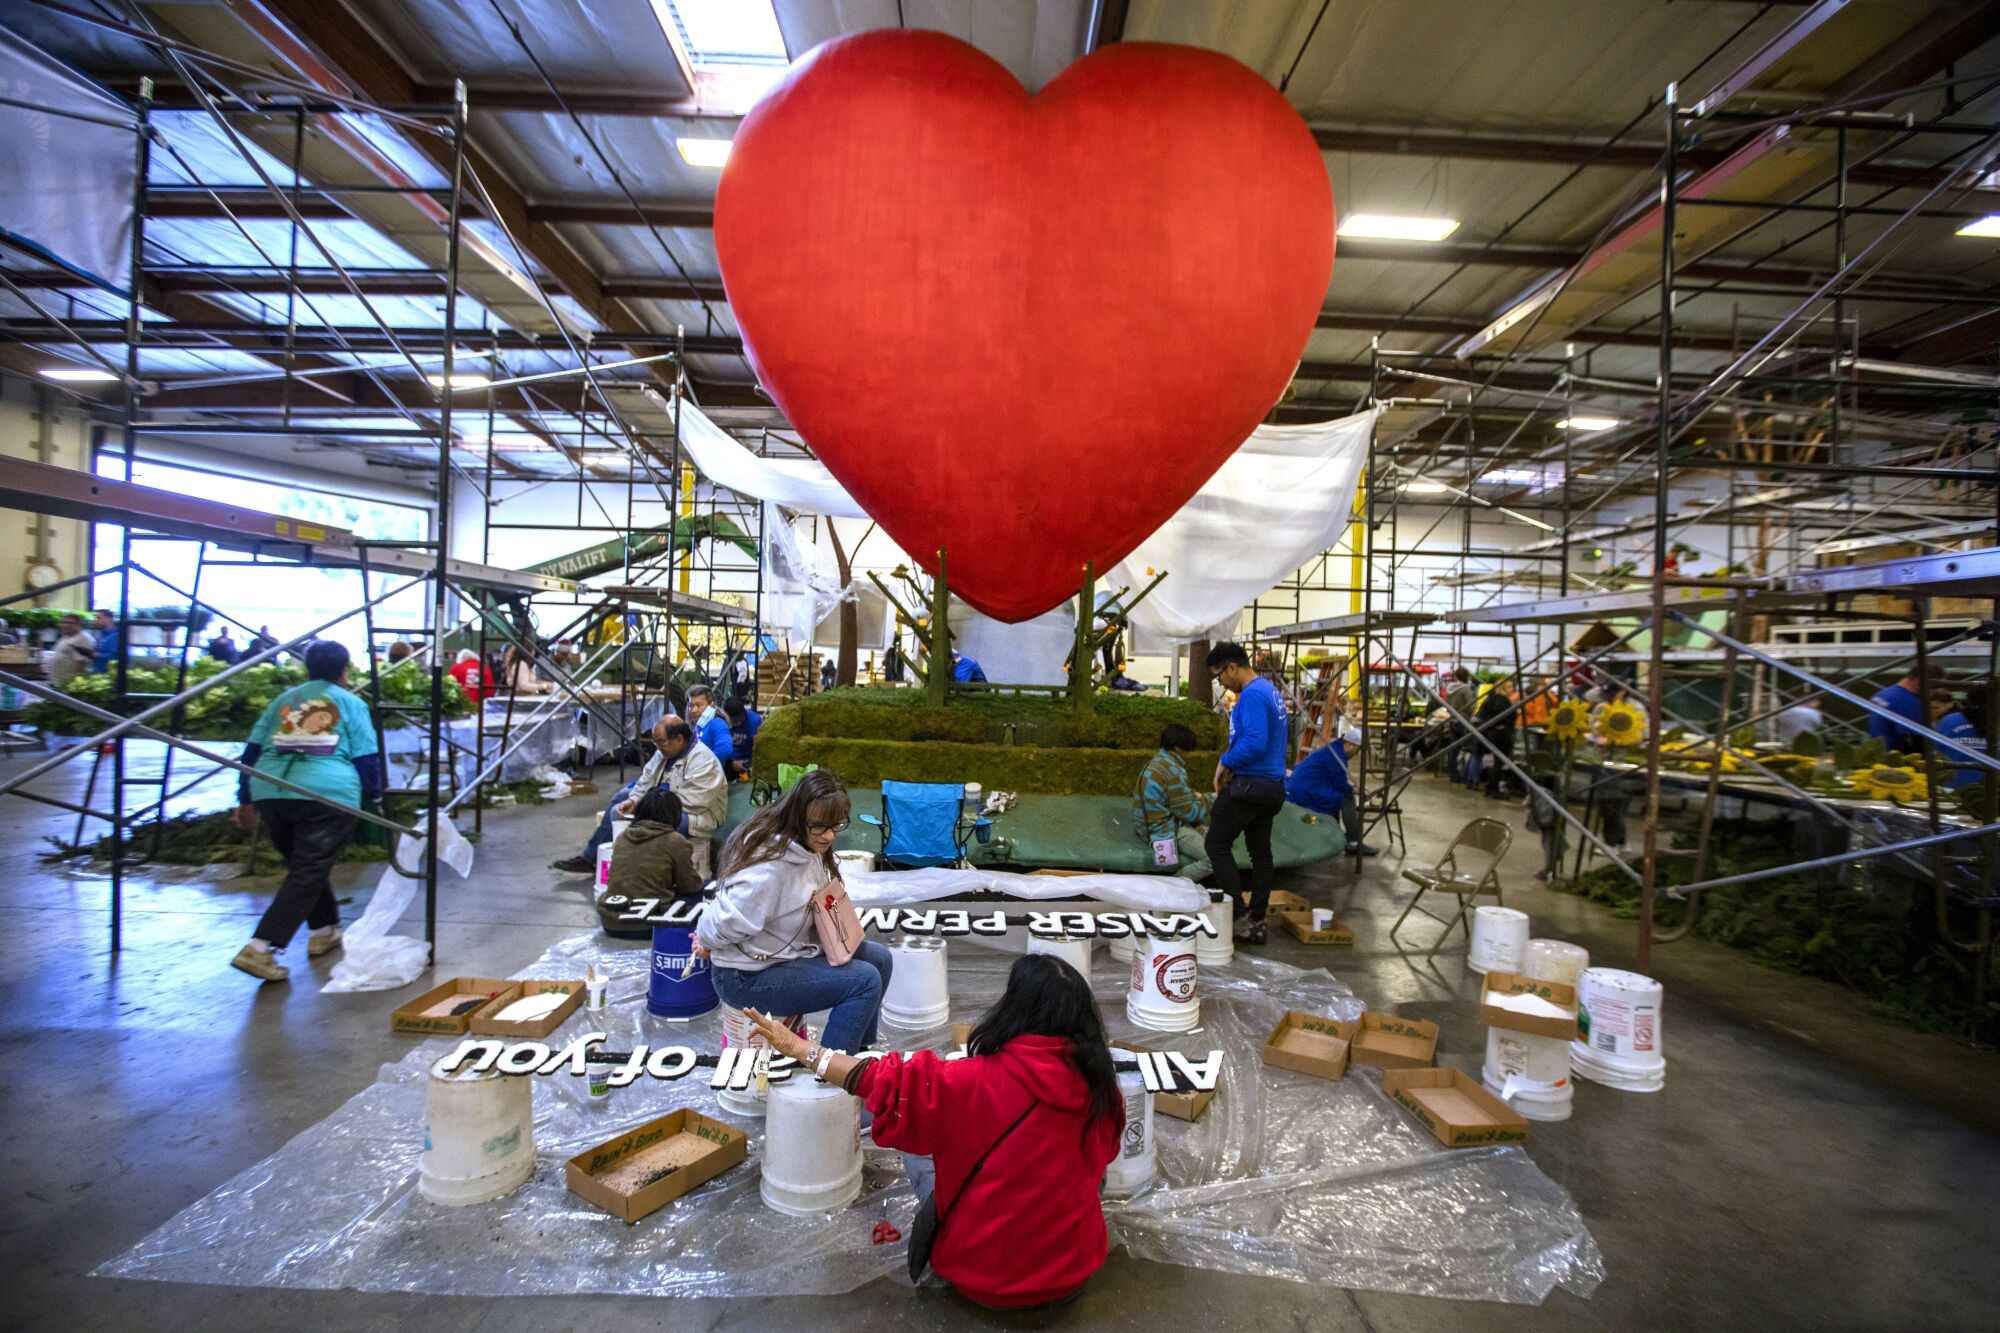 A giant red floral heart is getting its finishing touches 